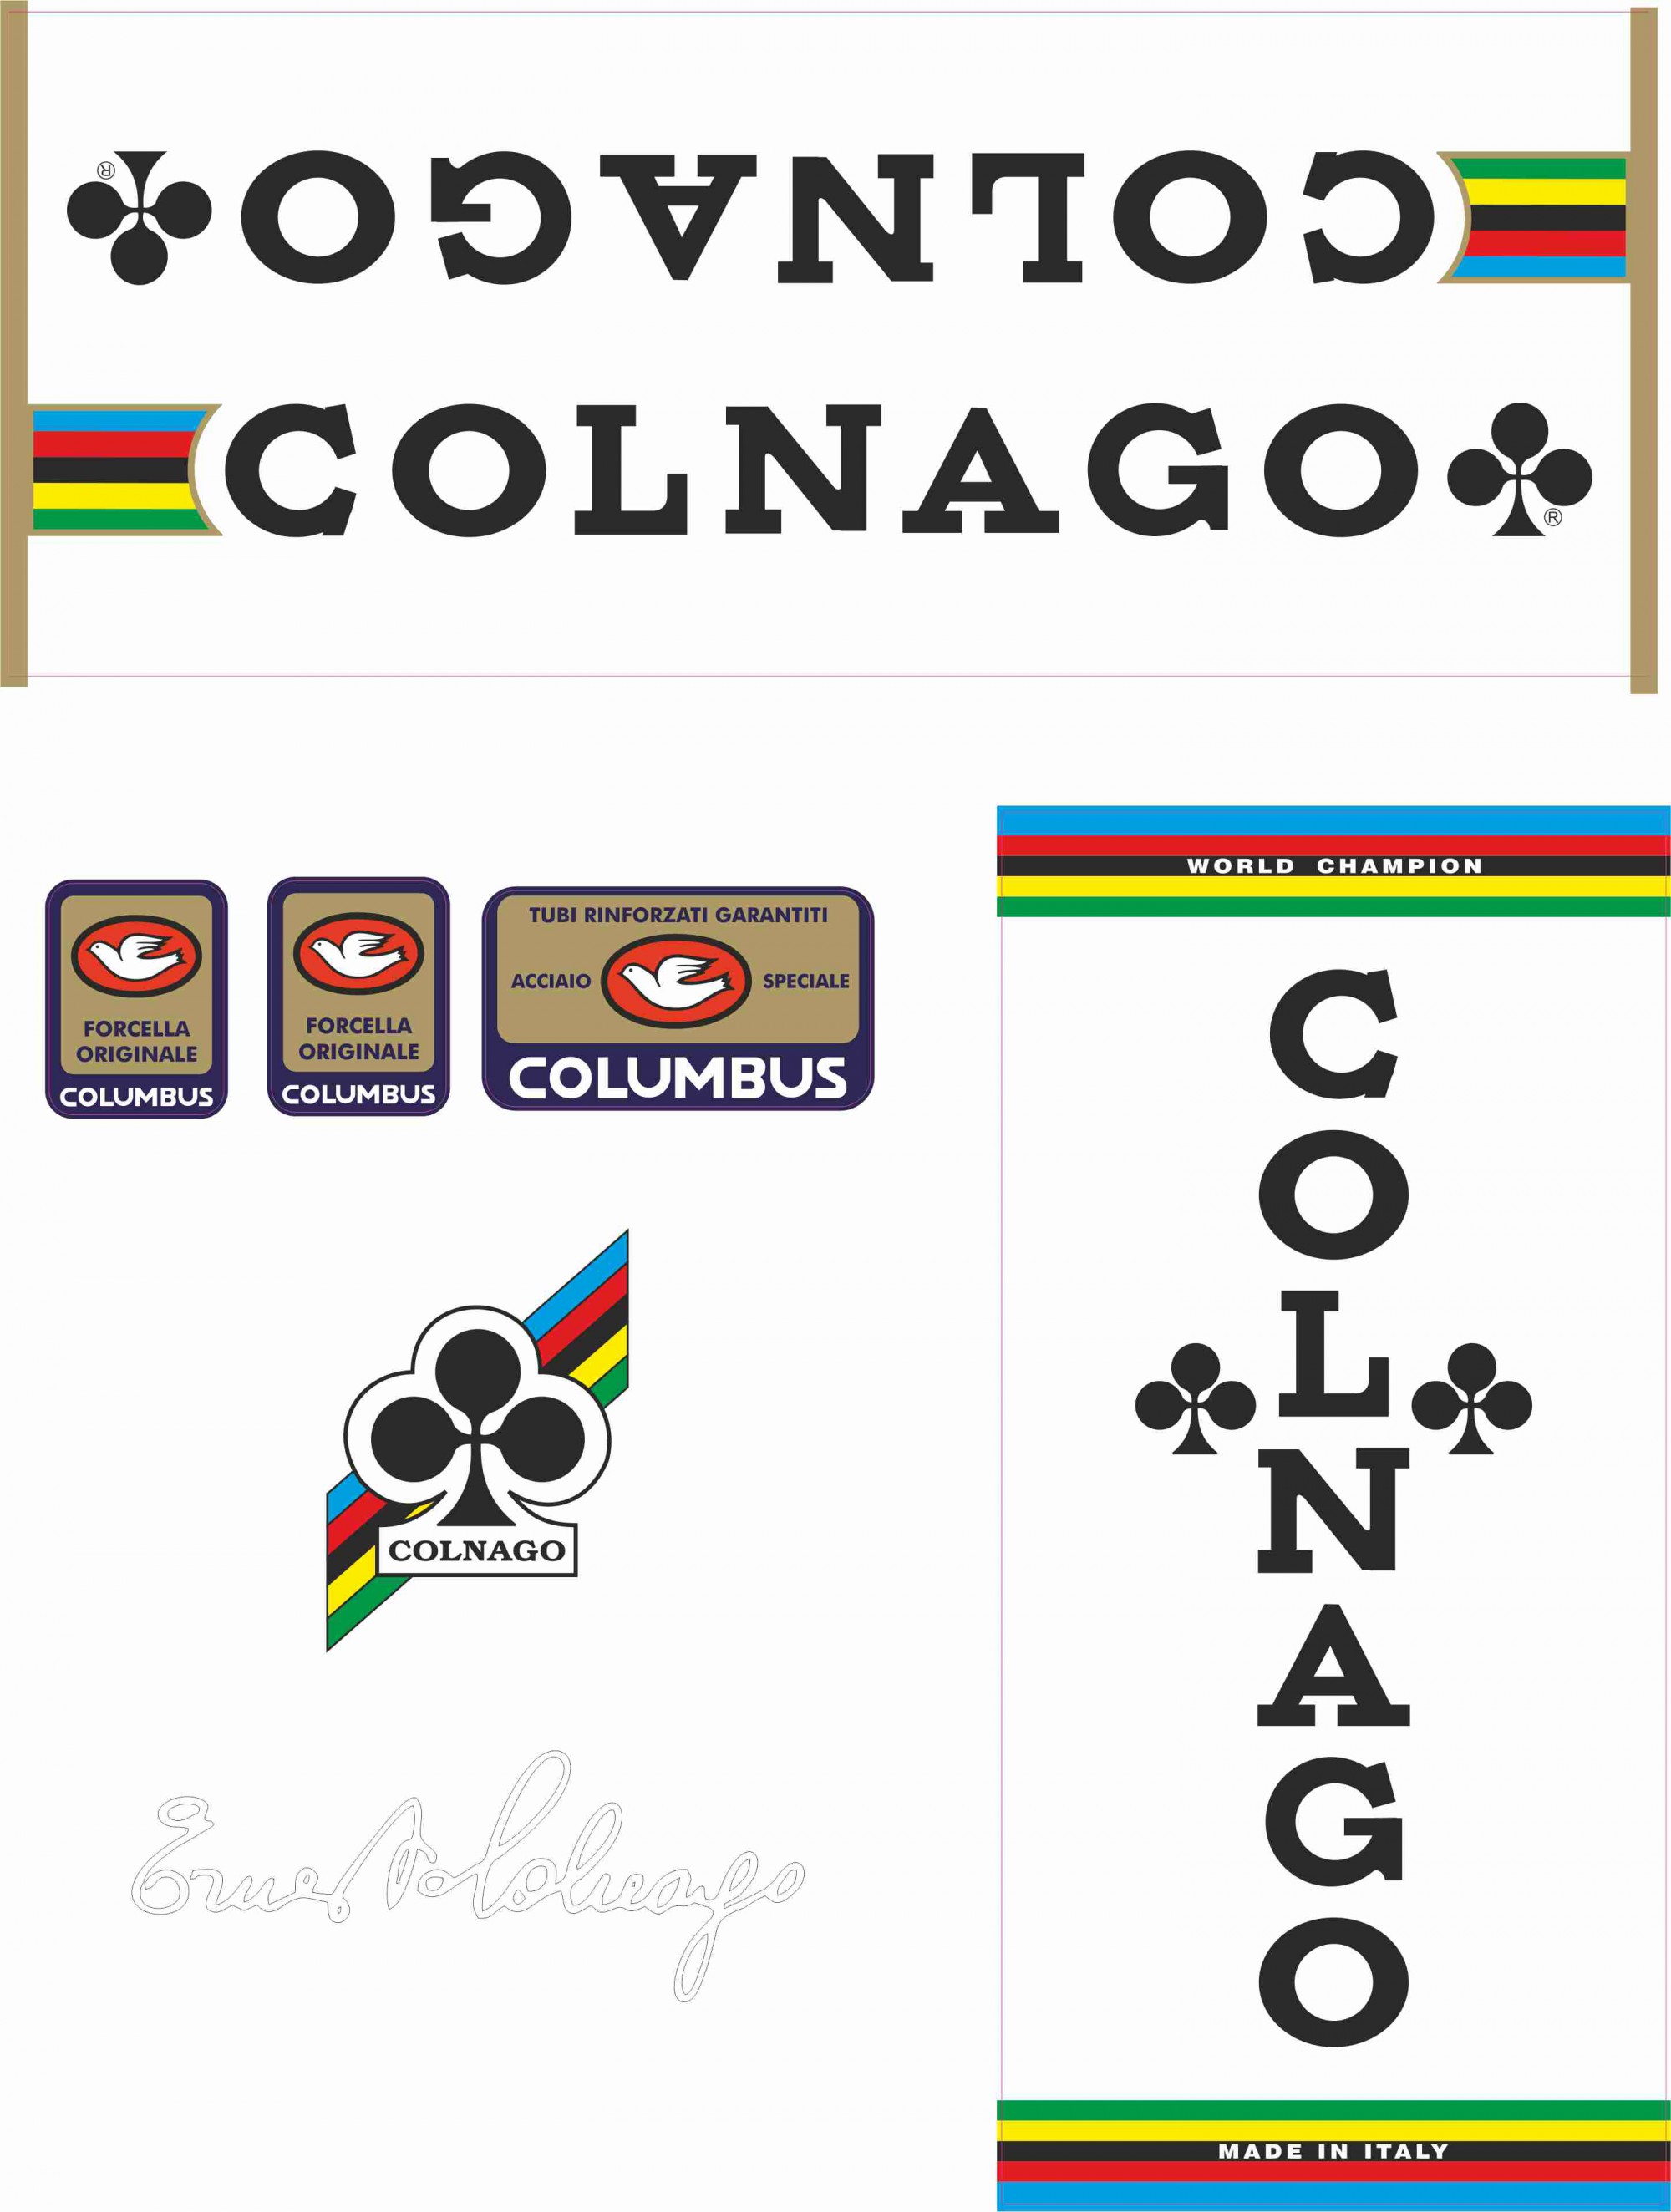 $12.99  FREE SHIPPING   CHOOSE COLOR 17 COLNAGO  BICYCLE VINYL CUT DECAL KIT 